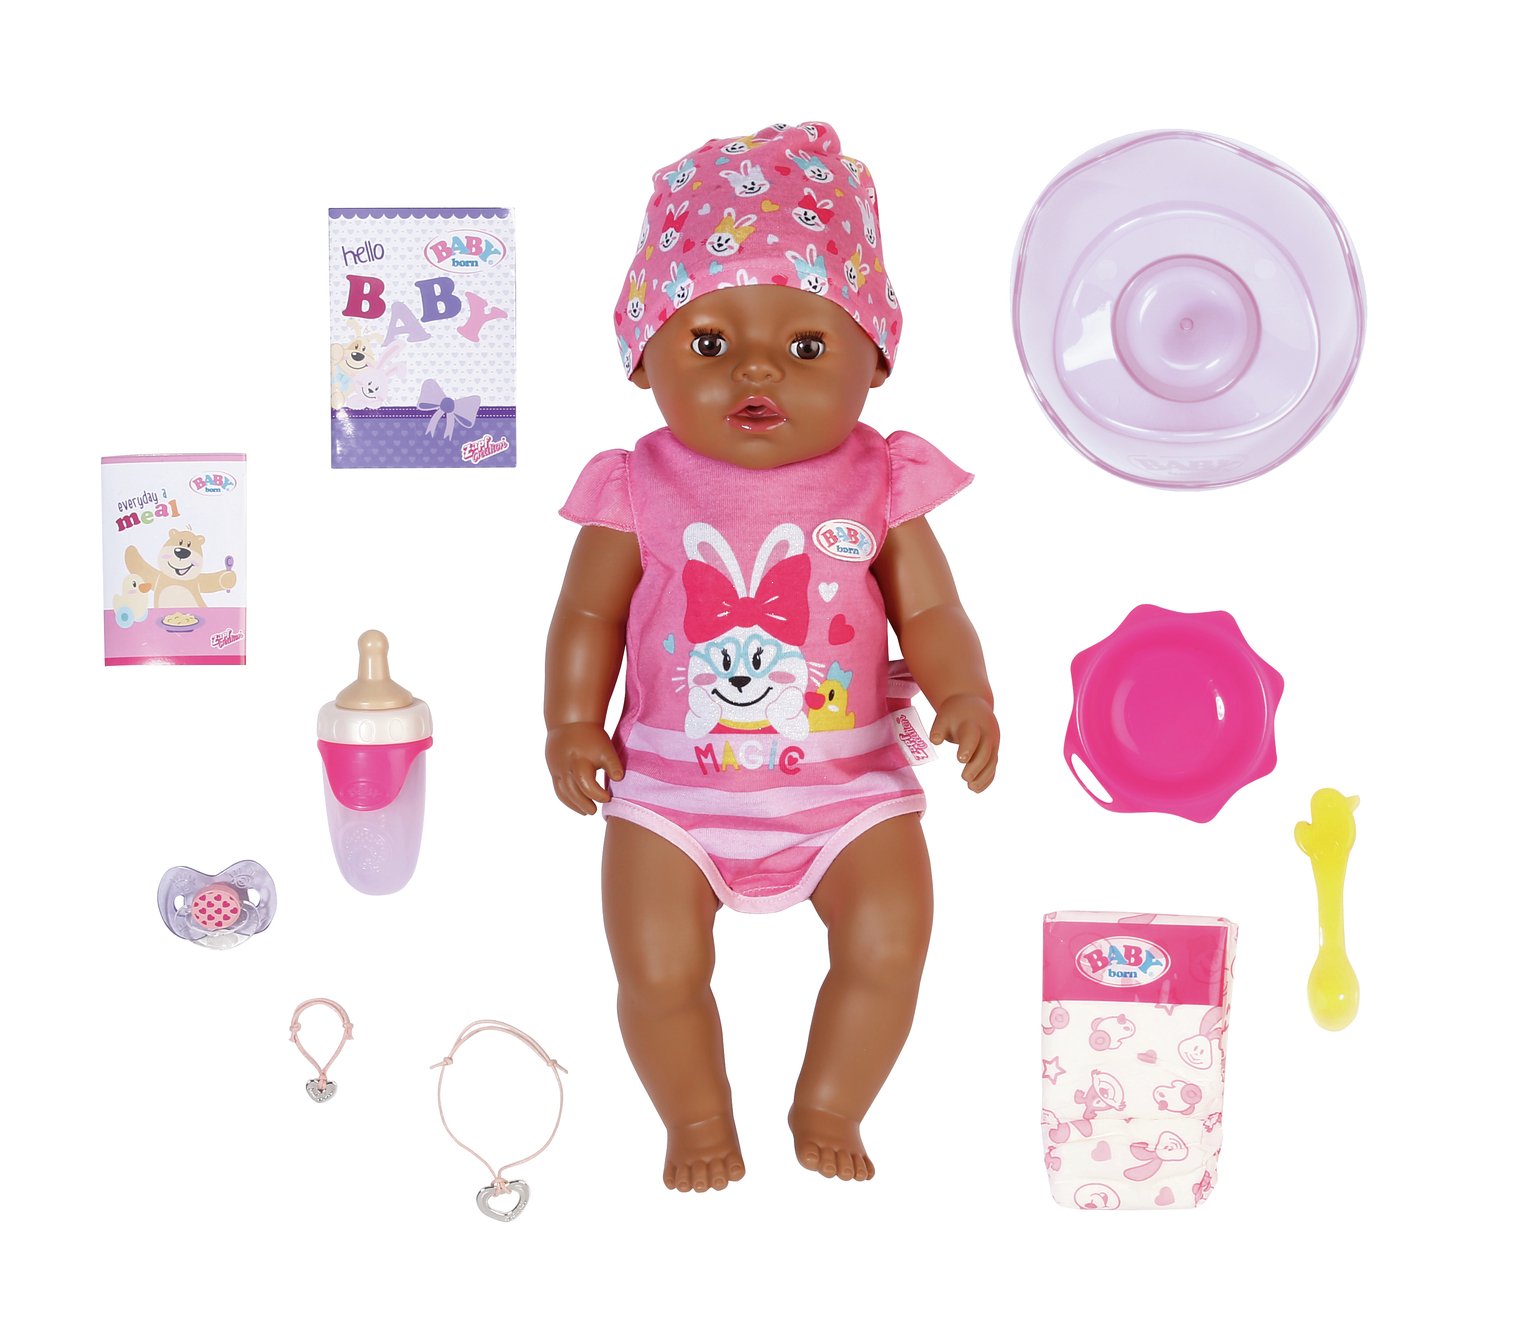 BABY born Magic Girl Doll in Dark Pink Outfit - 17inch/43cm